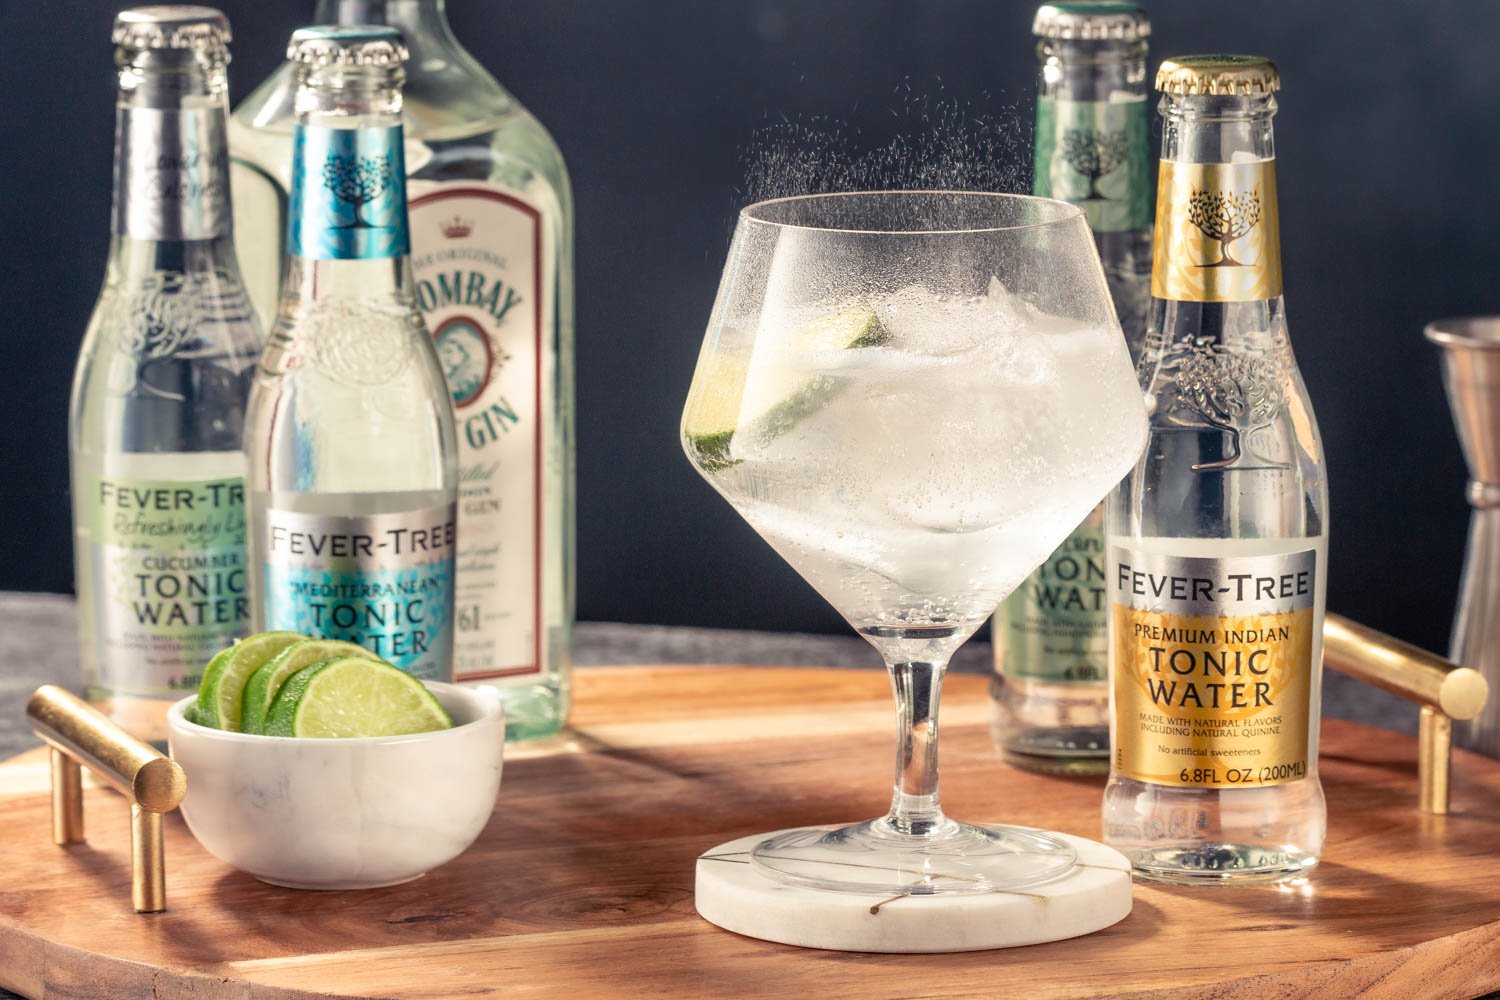 https://content.kegworks.com/hs-fs/hubfs/Blog/kegworks-how-to-make-gin-and-tonic-2.jpg?width=1500&name=kegworks-how-to-make-gin-and-tonic-2.jpg